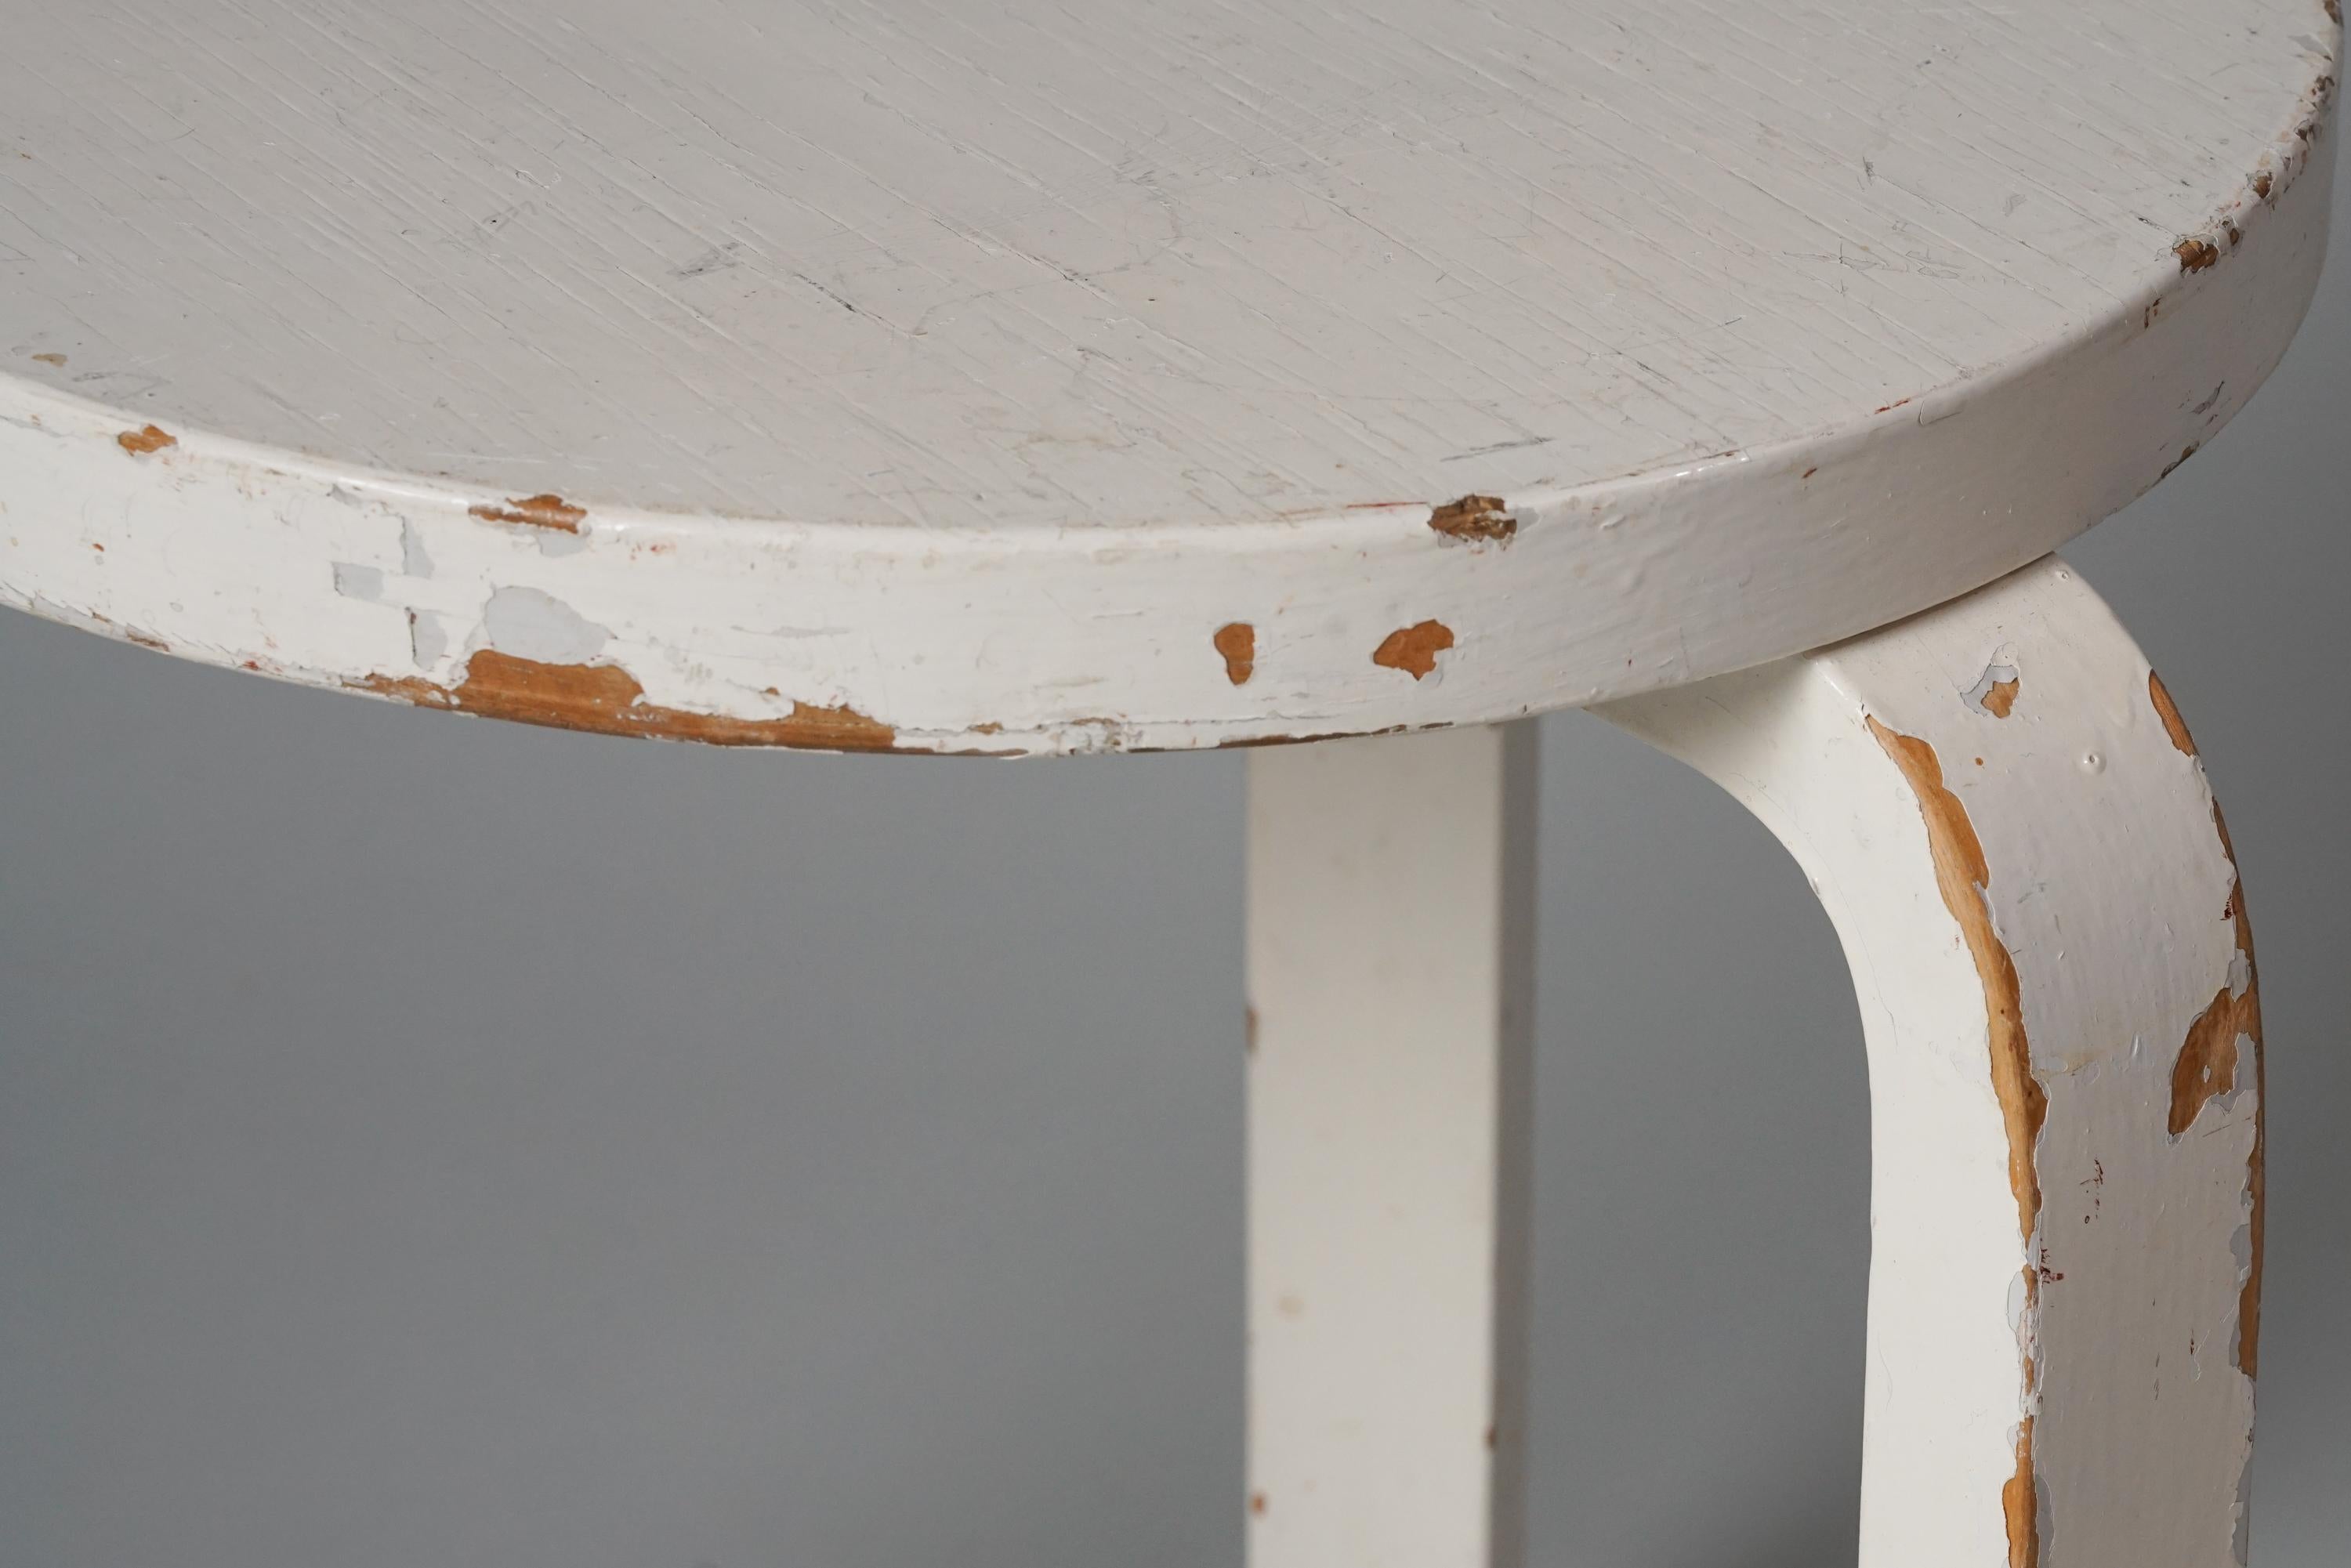 Model 60 stool, designed by Alvar Aalto, manufactured by Oy Huonekalu- ja Rakennustyötehdas Ab, 1930/1940s. Painted birch. Good vintage condition, heavy patina consistent with age and use. 

Alvar Aalto (1898-1976) is probably the most famous